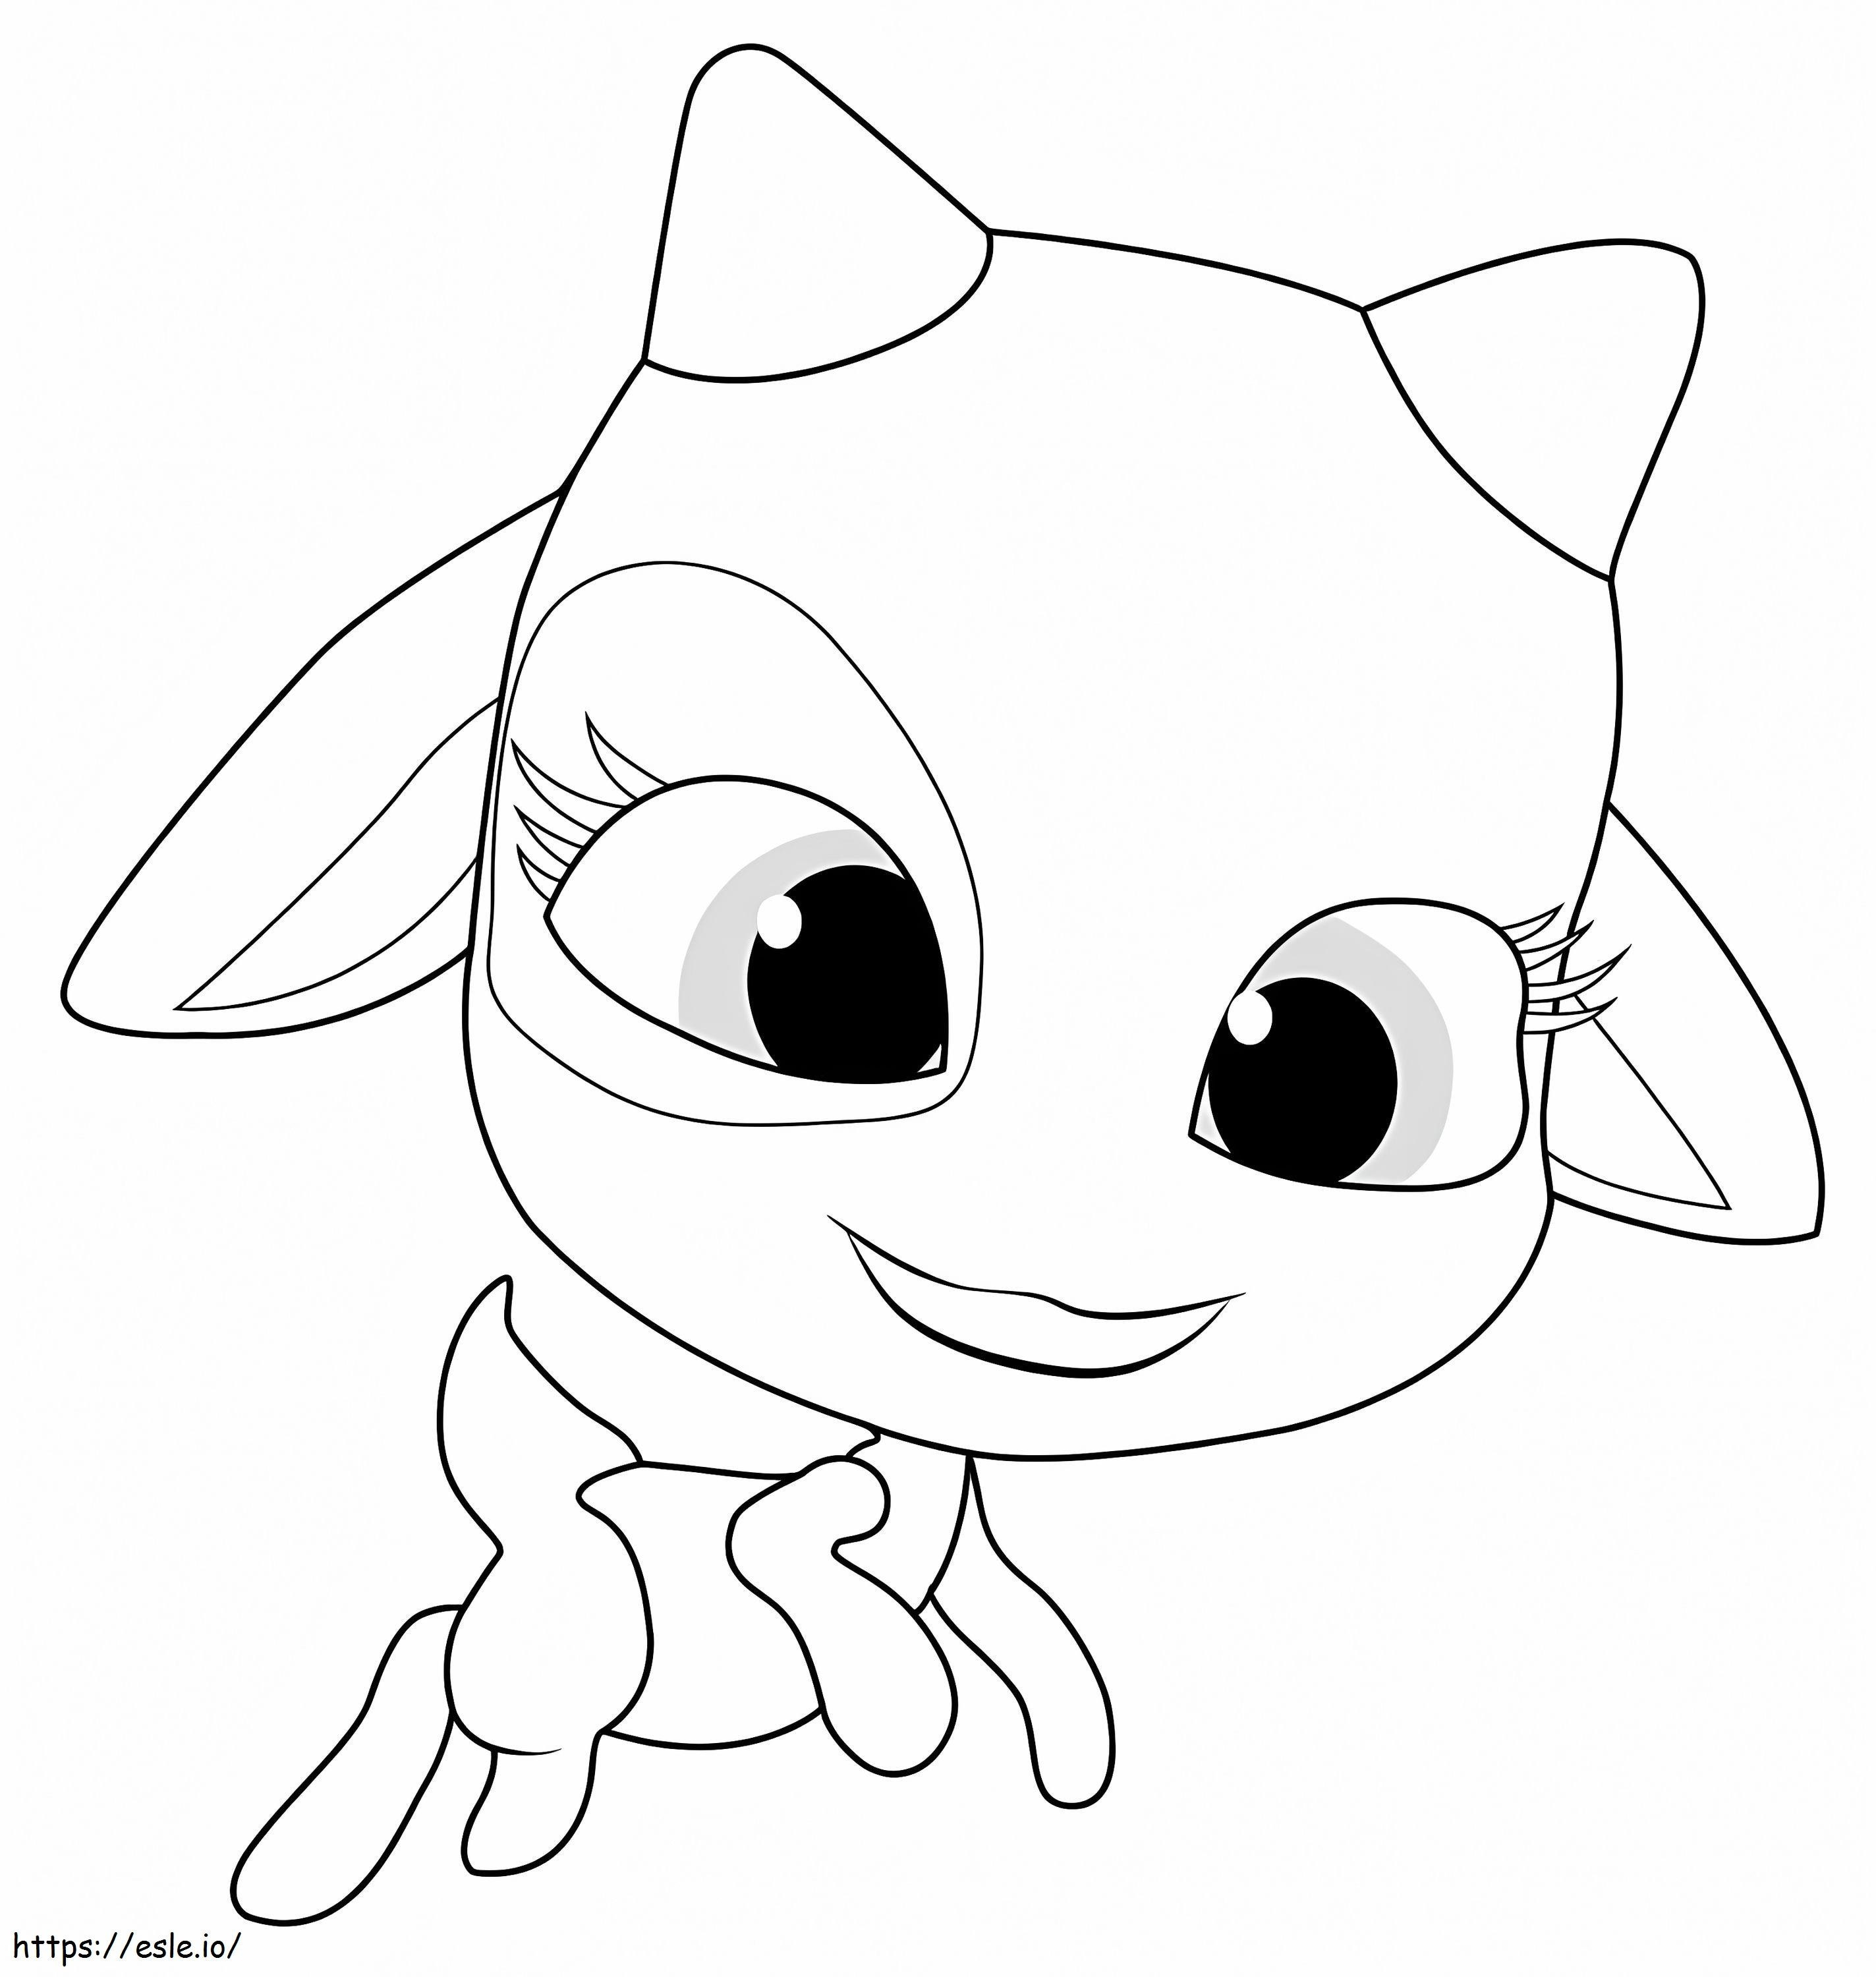 Ziggy To Me coloring page